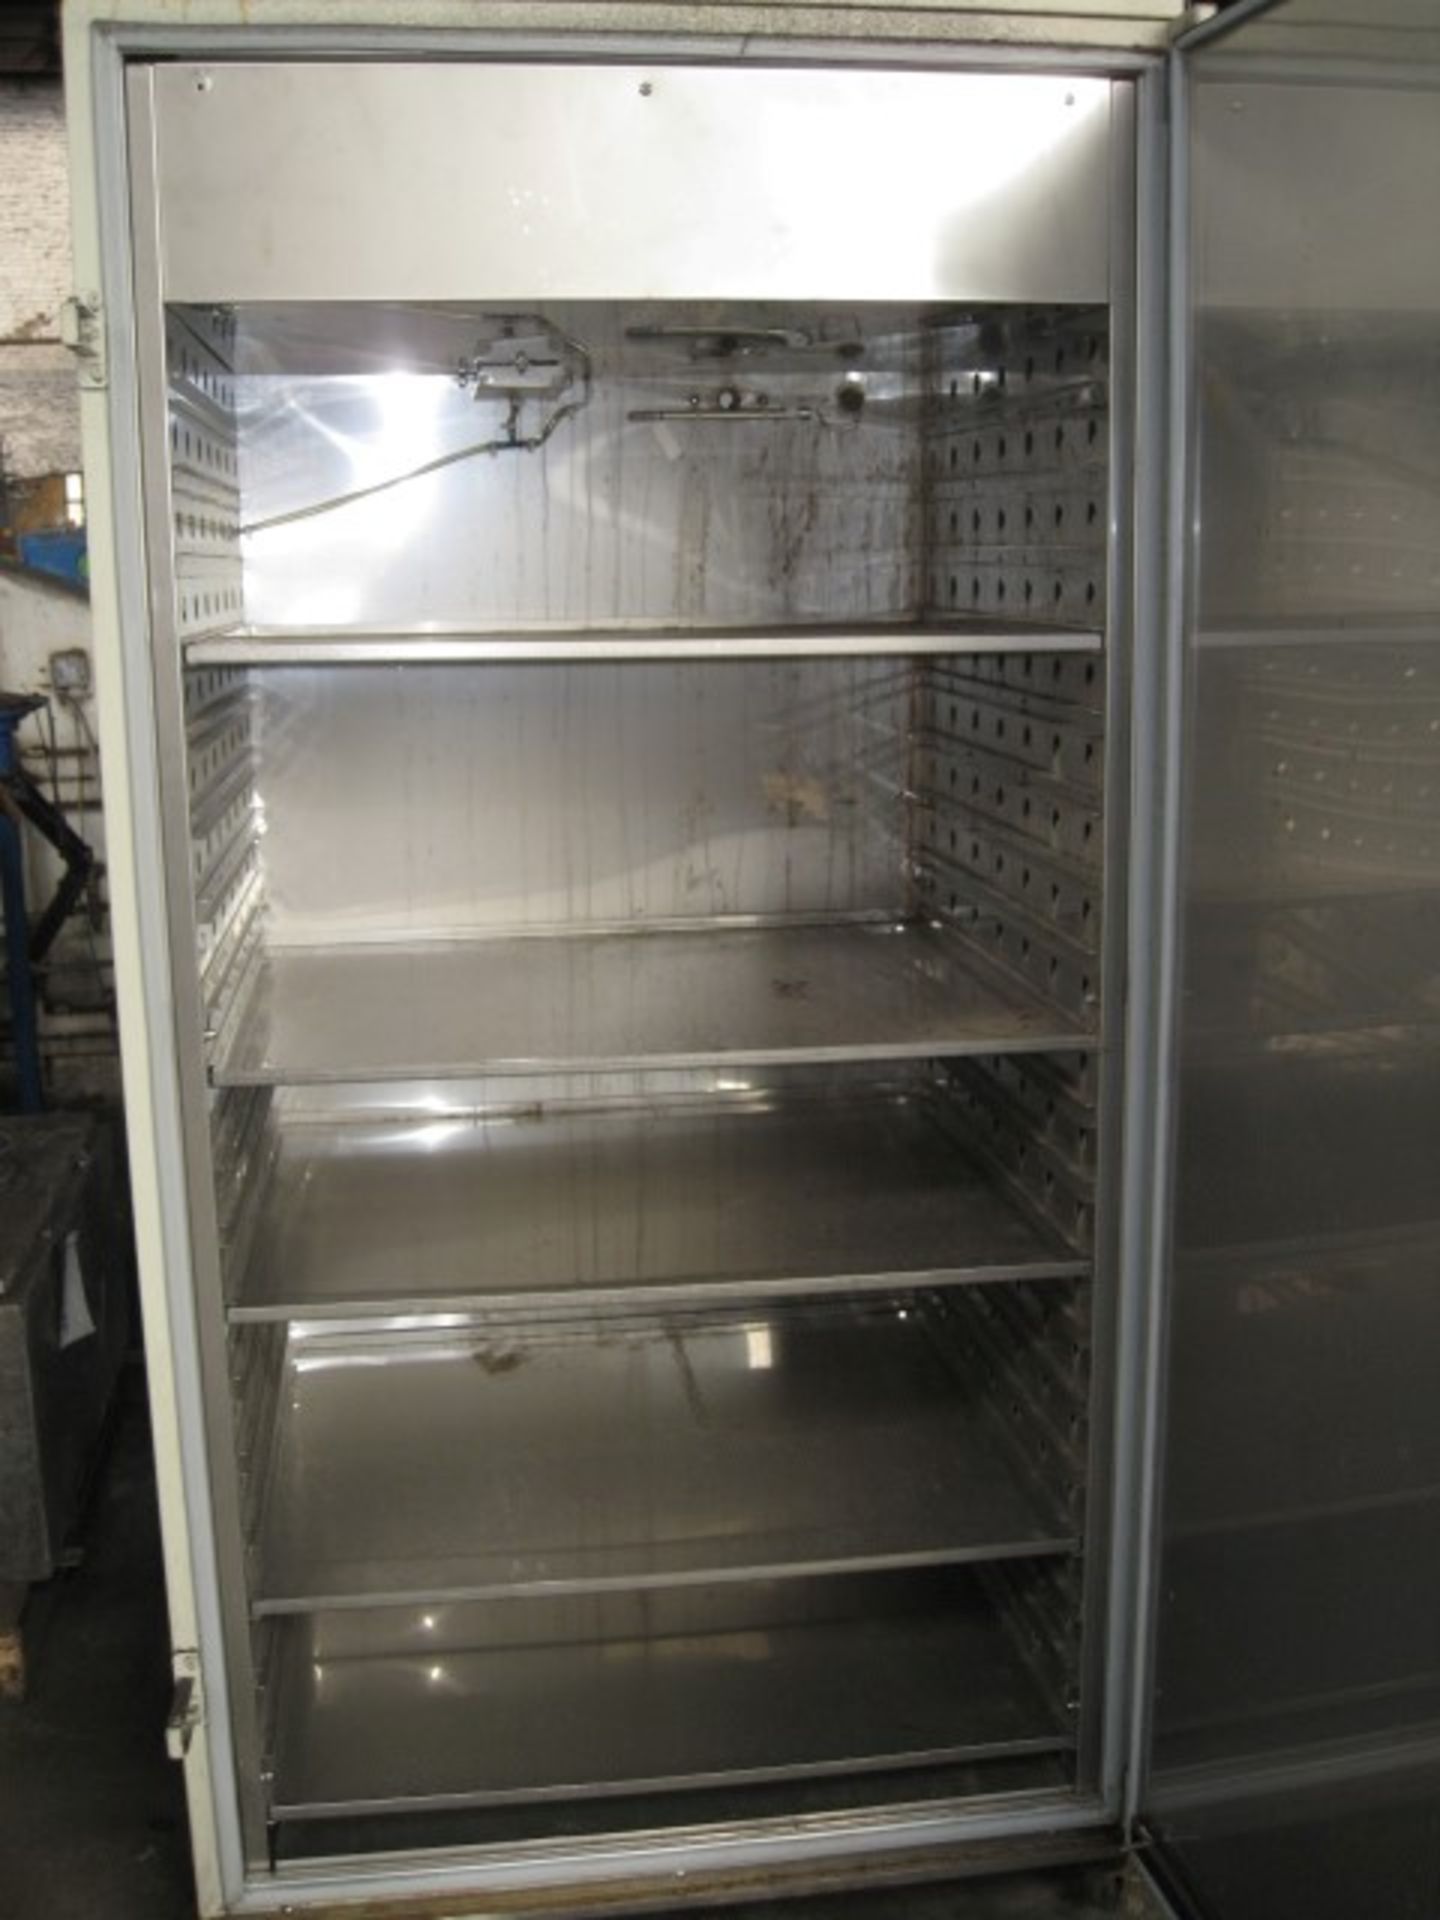 Lunaire incubator, model CEO932W-4, stainless steel contact surfaces, single doo - Image 2 of 10